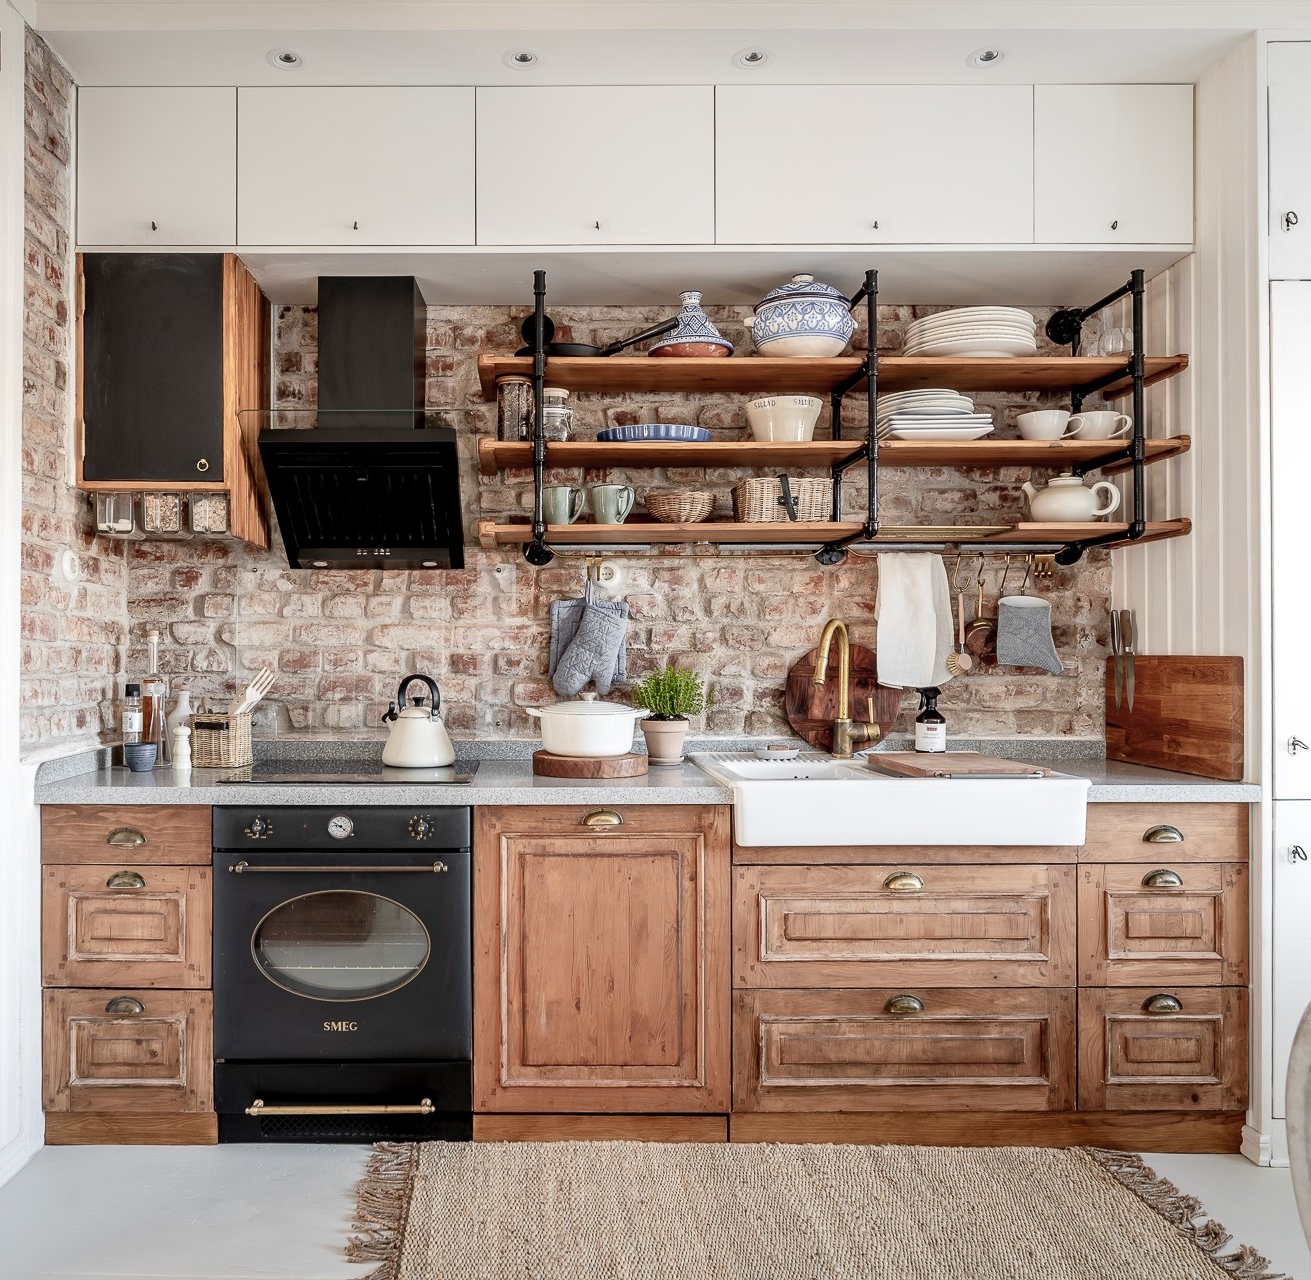 What Are The Pros And Cons Of A Reclaimed Brick Kitchen